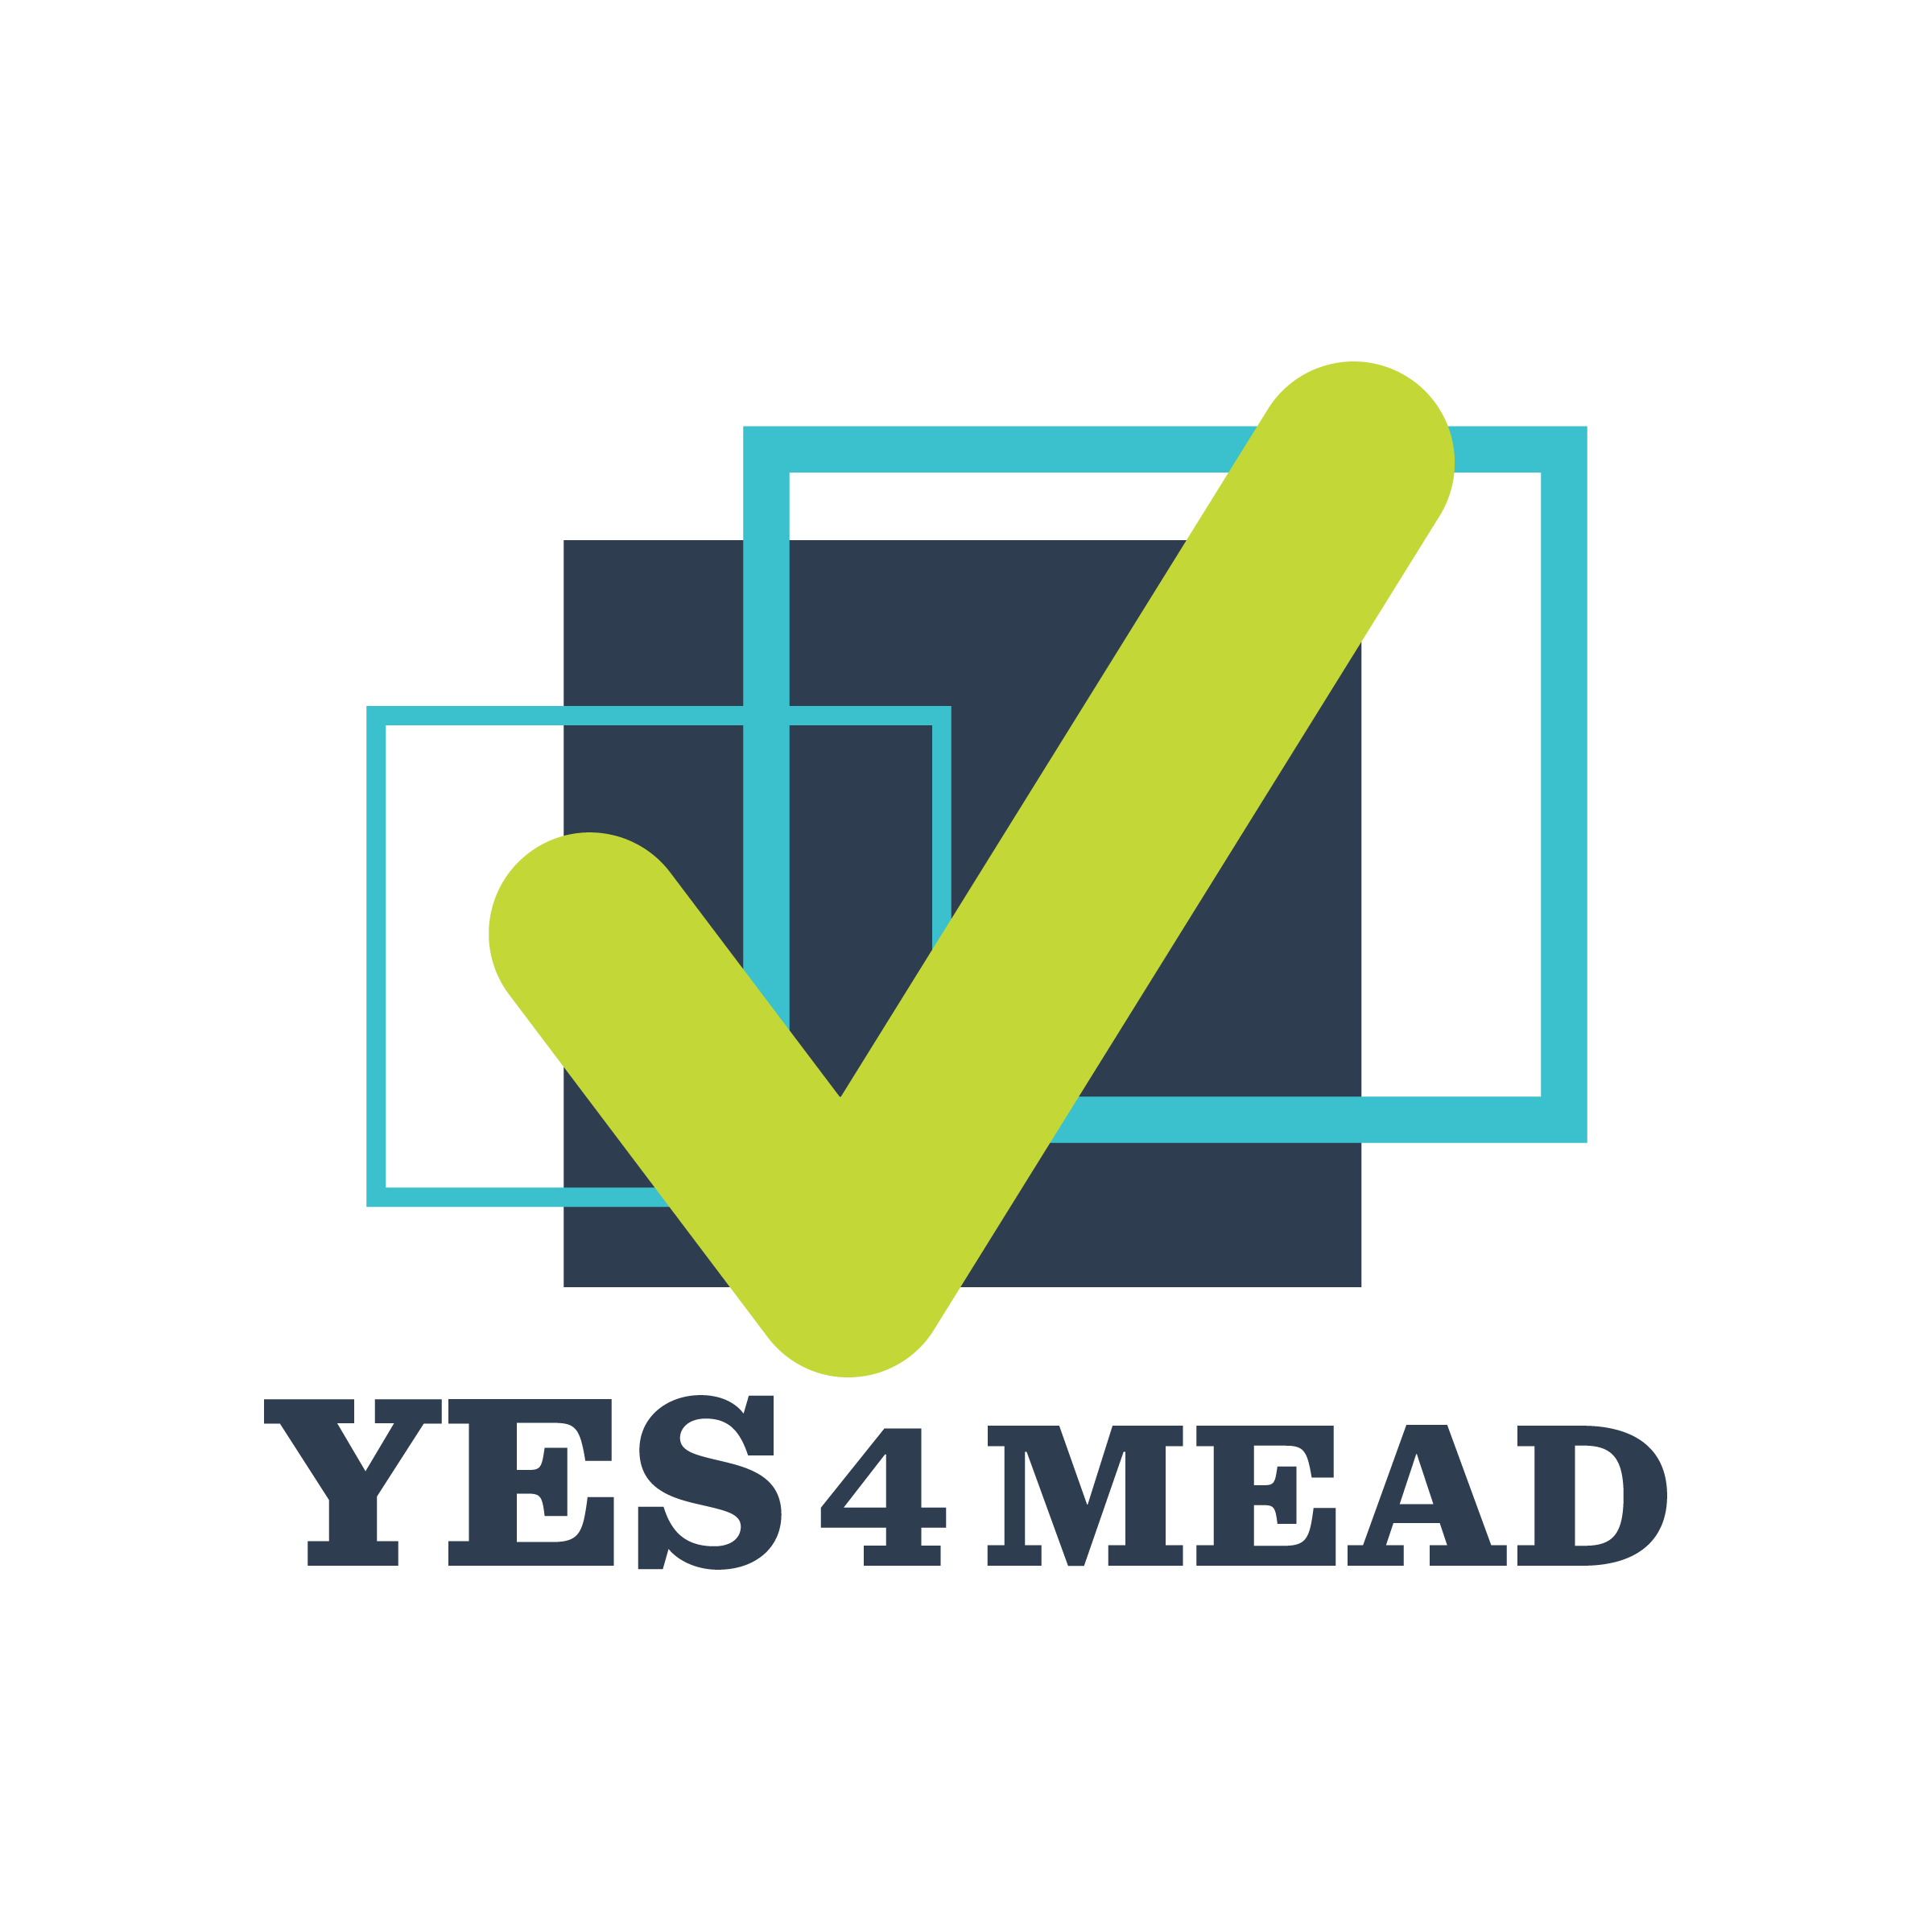 Yes 4 Mead logo with green check mark